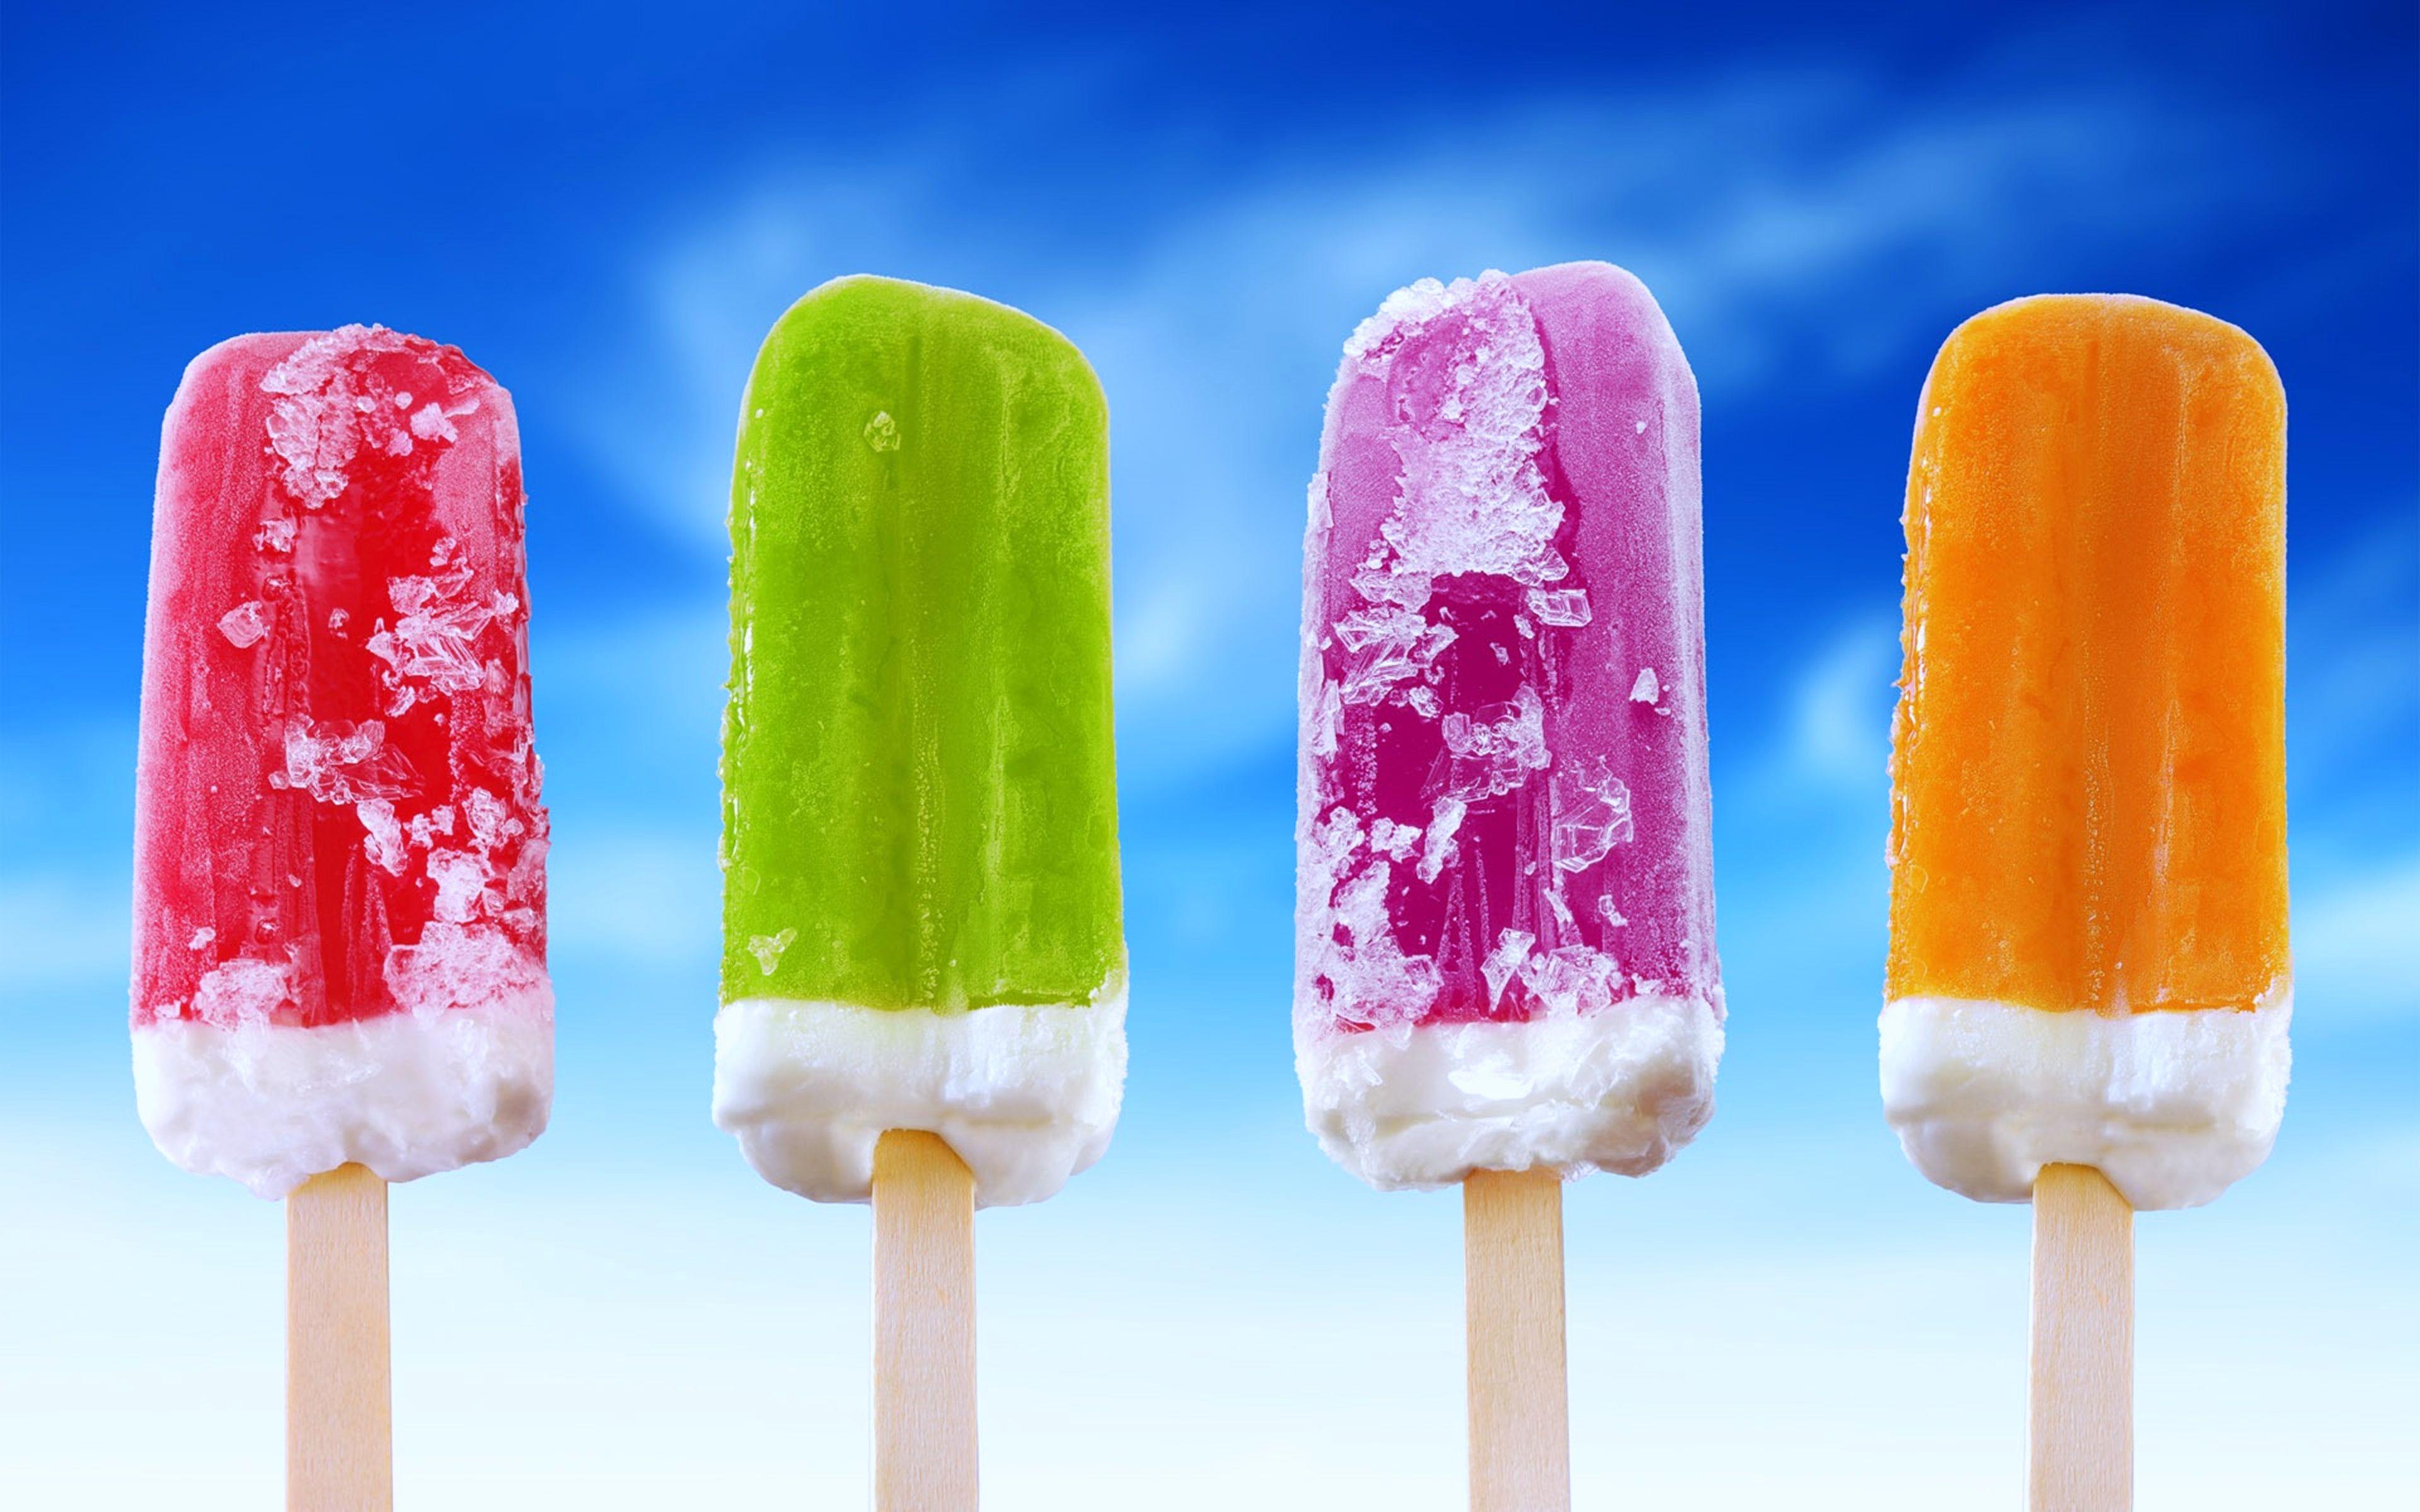 Colorful Icecream 4k Ultra HD Wallpaper. Background Image